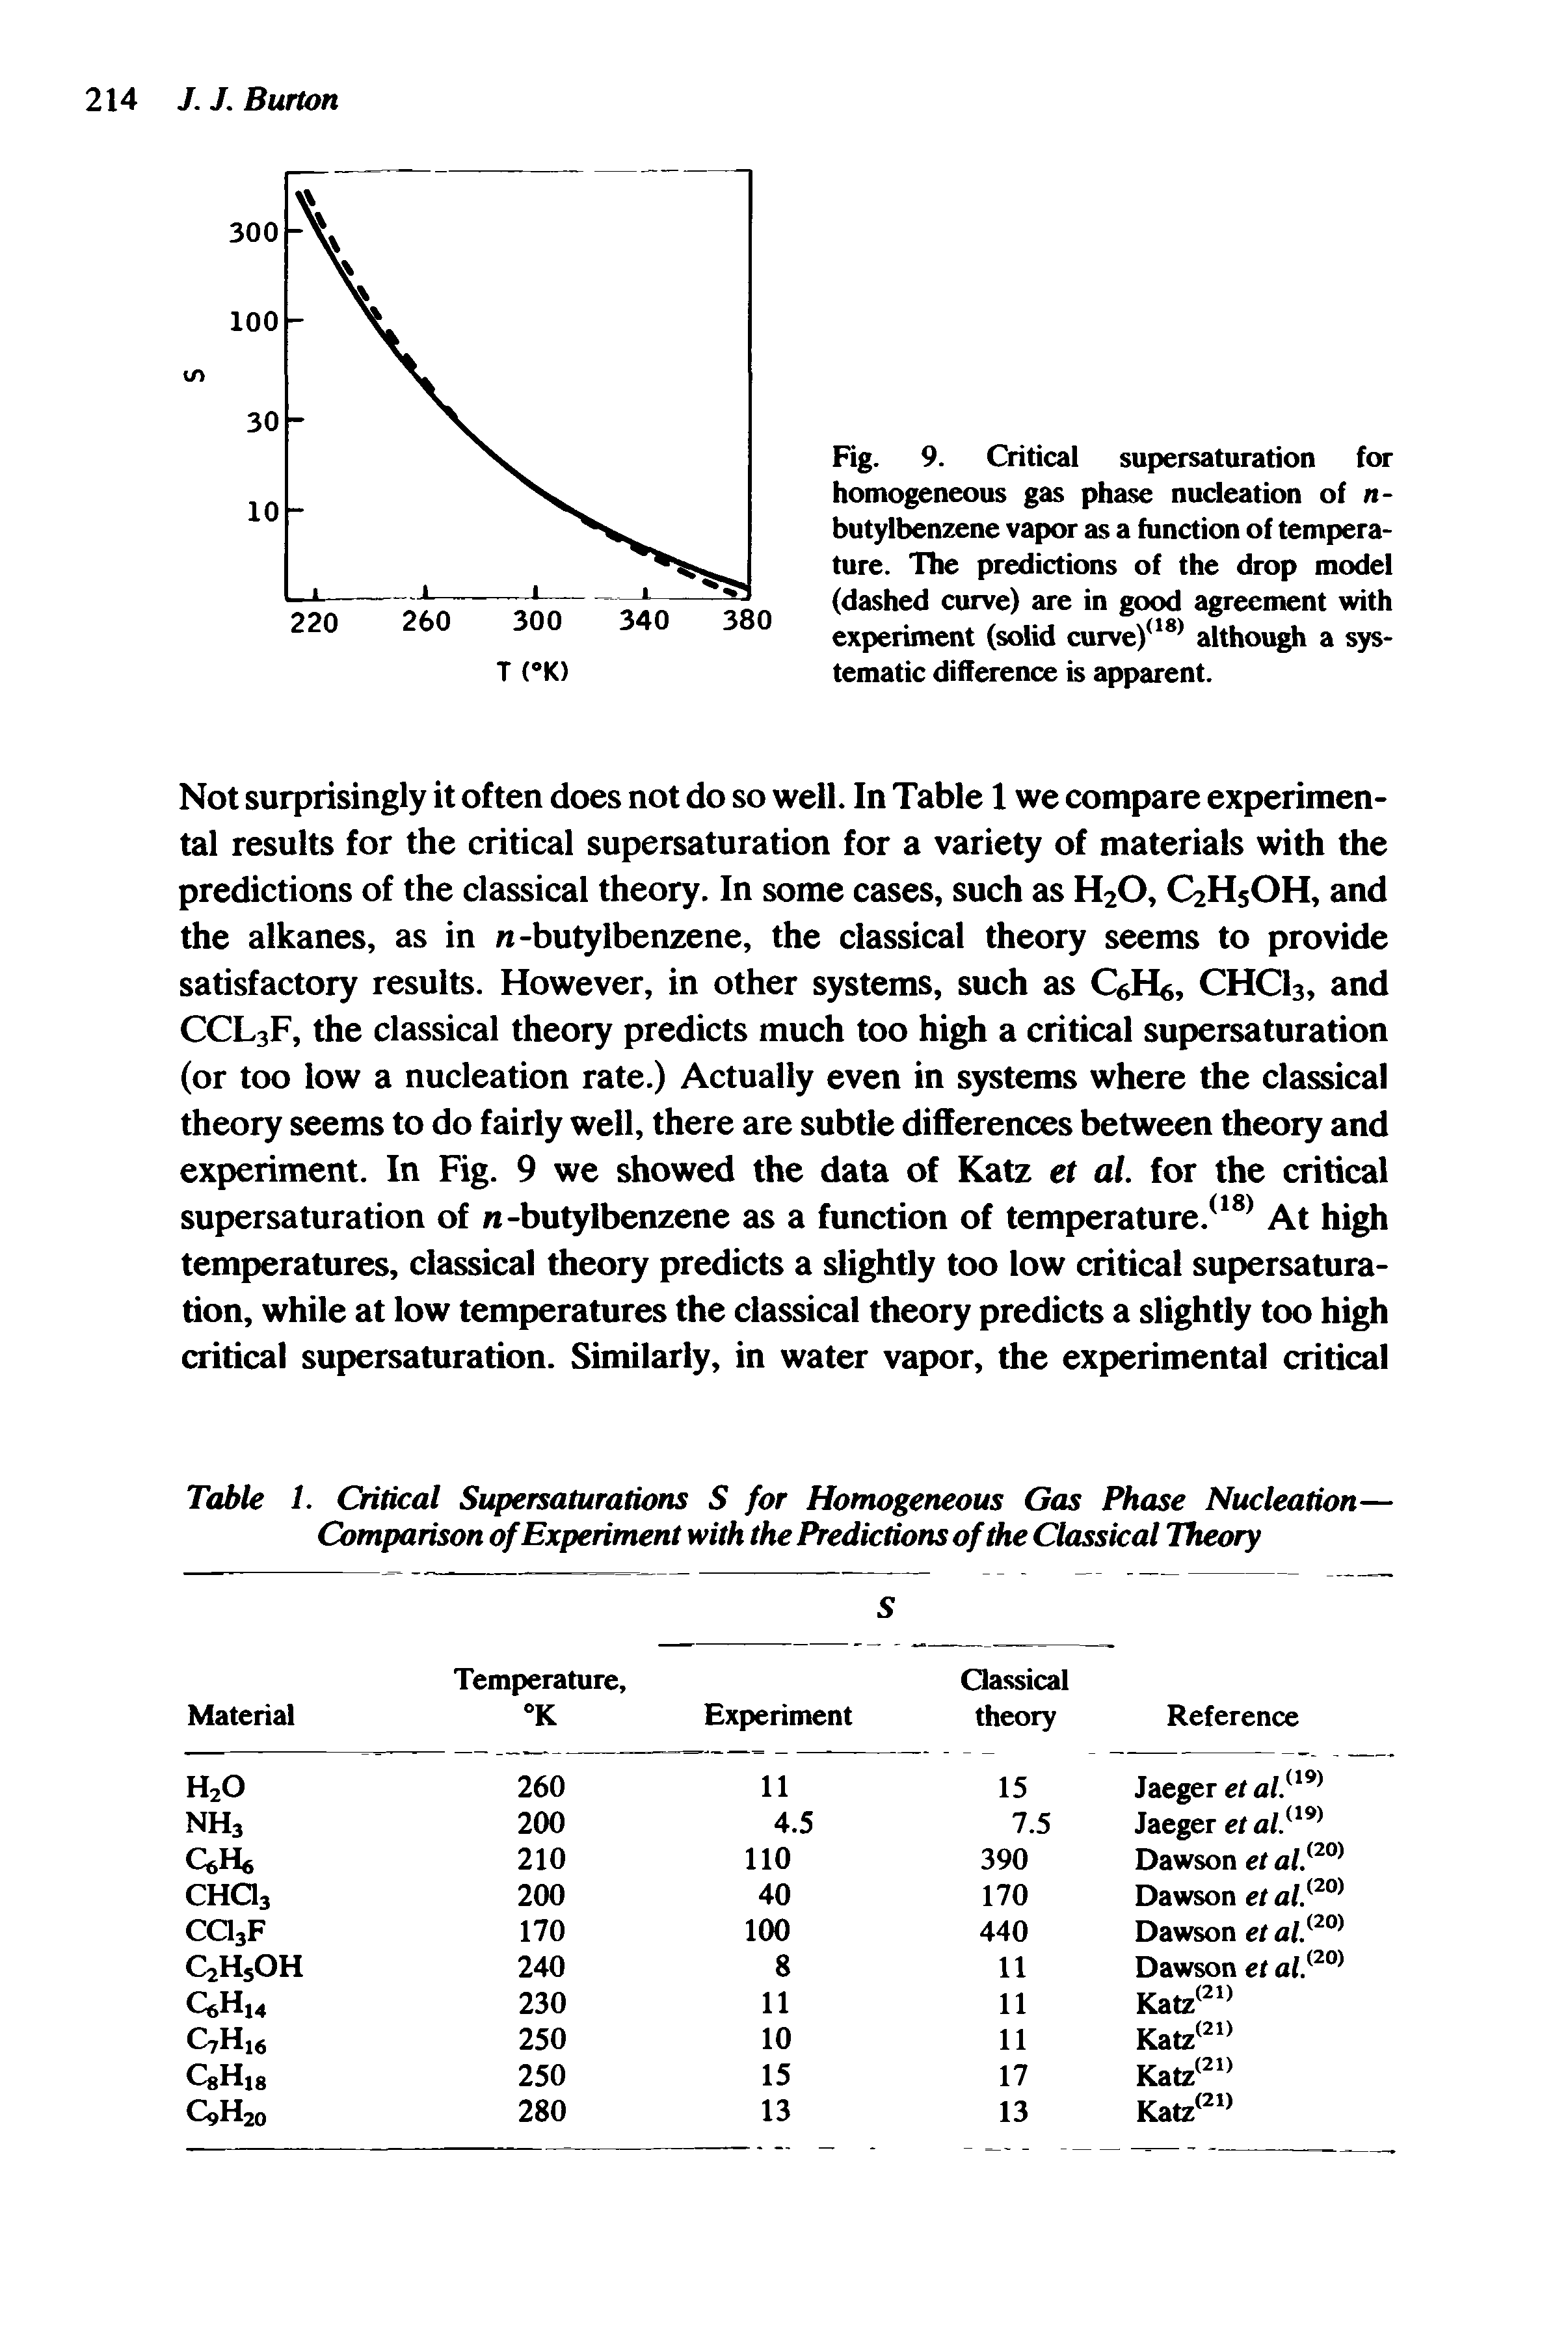 Fig. 9. Critical supersaturation for homogeneous gas phase nucleation of n-butylbenzene vapor as a function of temperature. The predictions of the drop model (dashed curve) are in good agreement with experiment (solid curve) although a systematic difference is apparent.